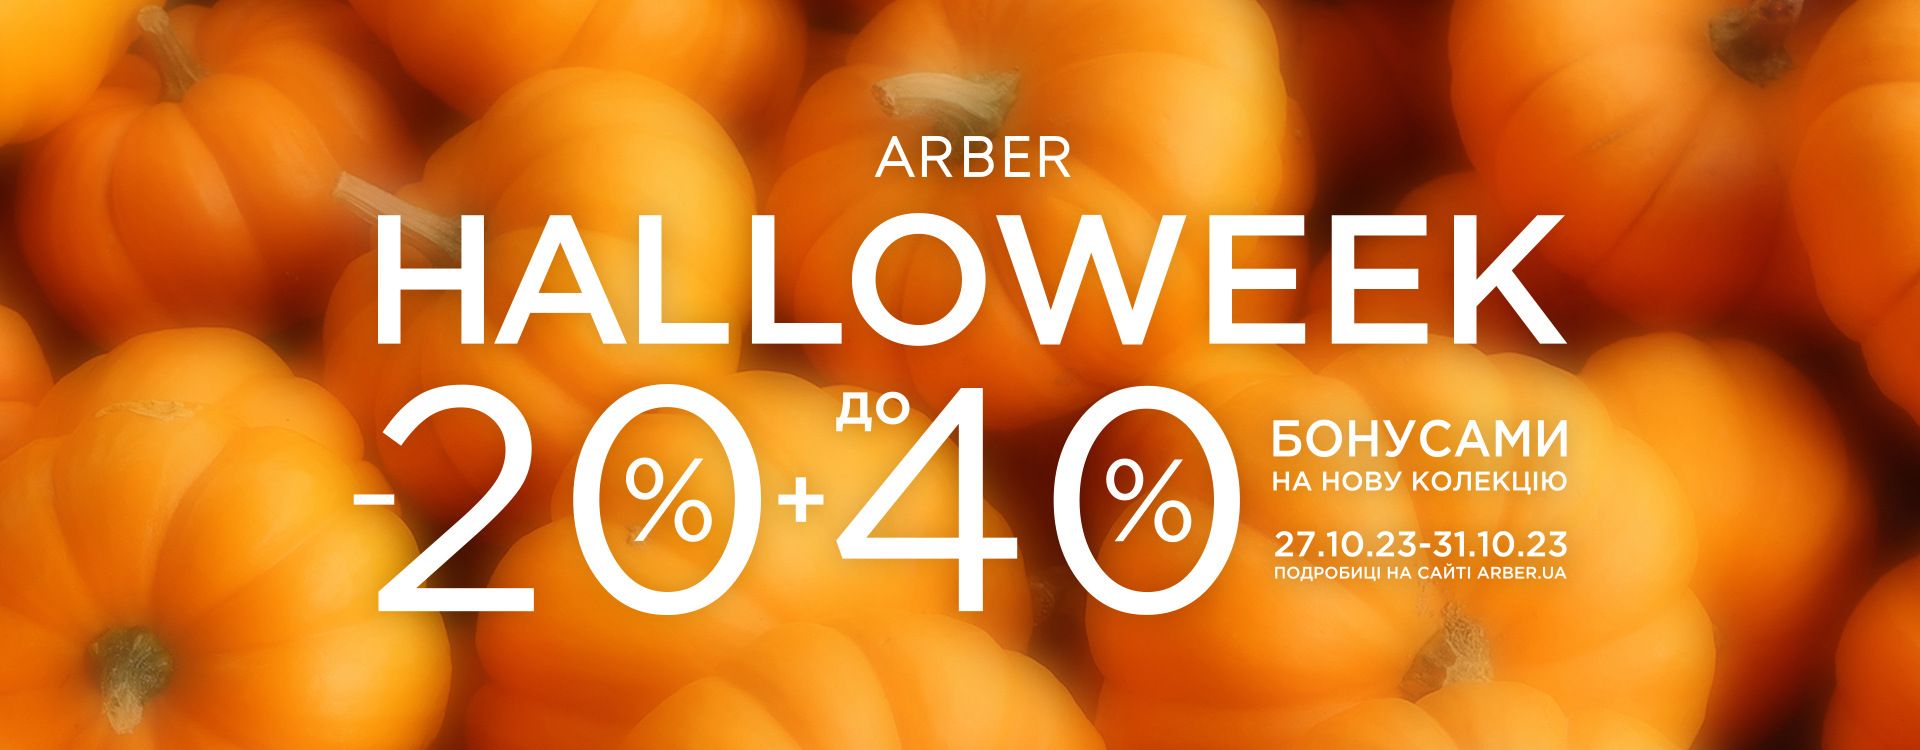 Halloweek is already in ARBER with discounts